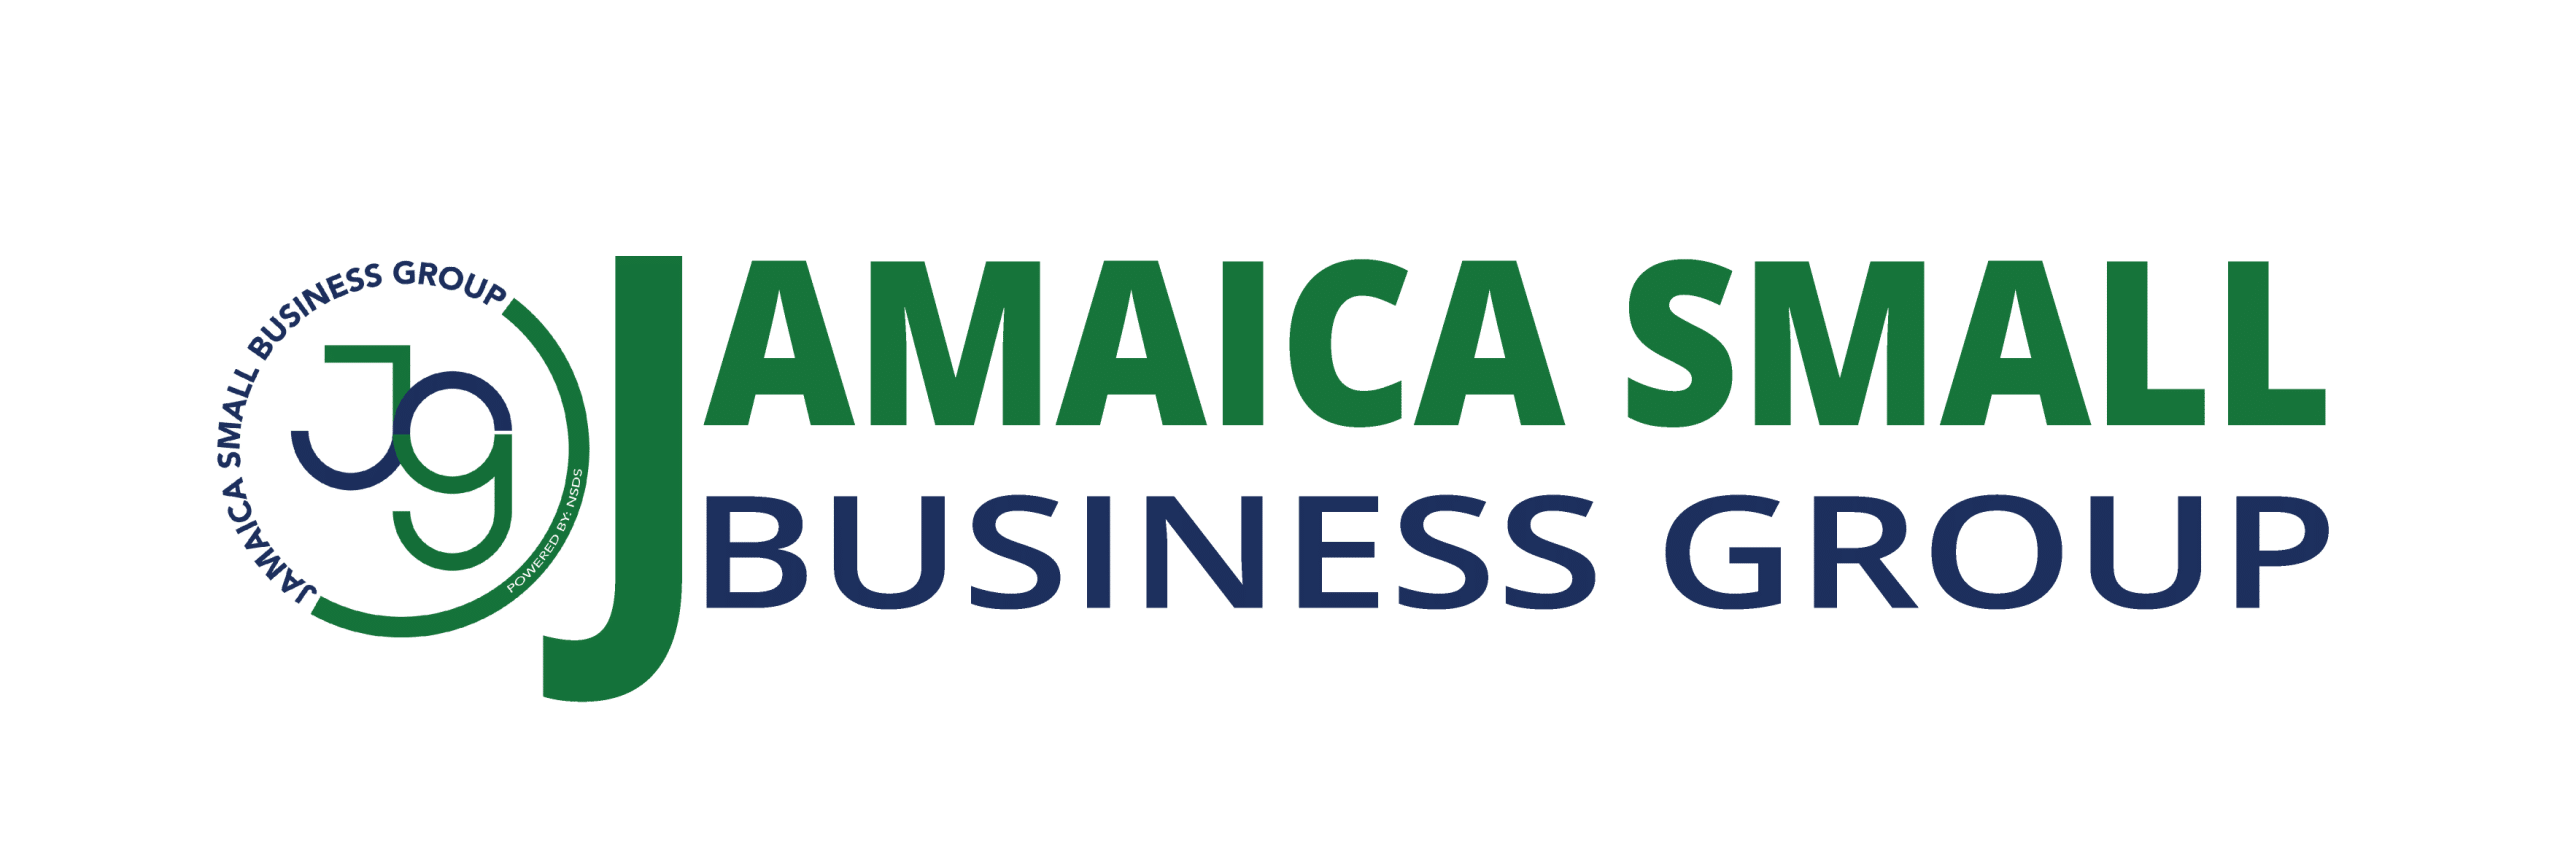 Jamaica Small Business Group – MARKETING SERVICES